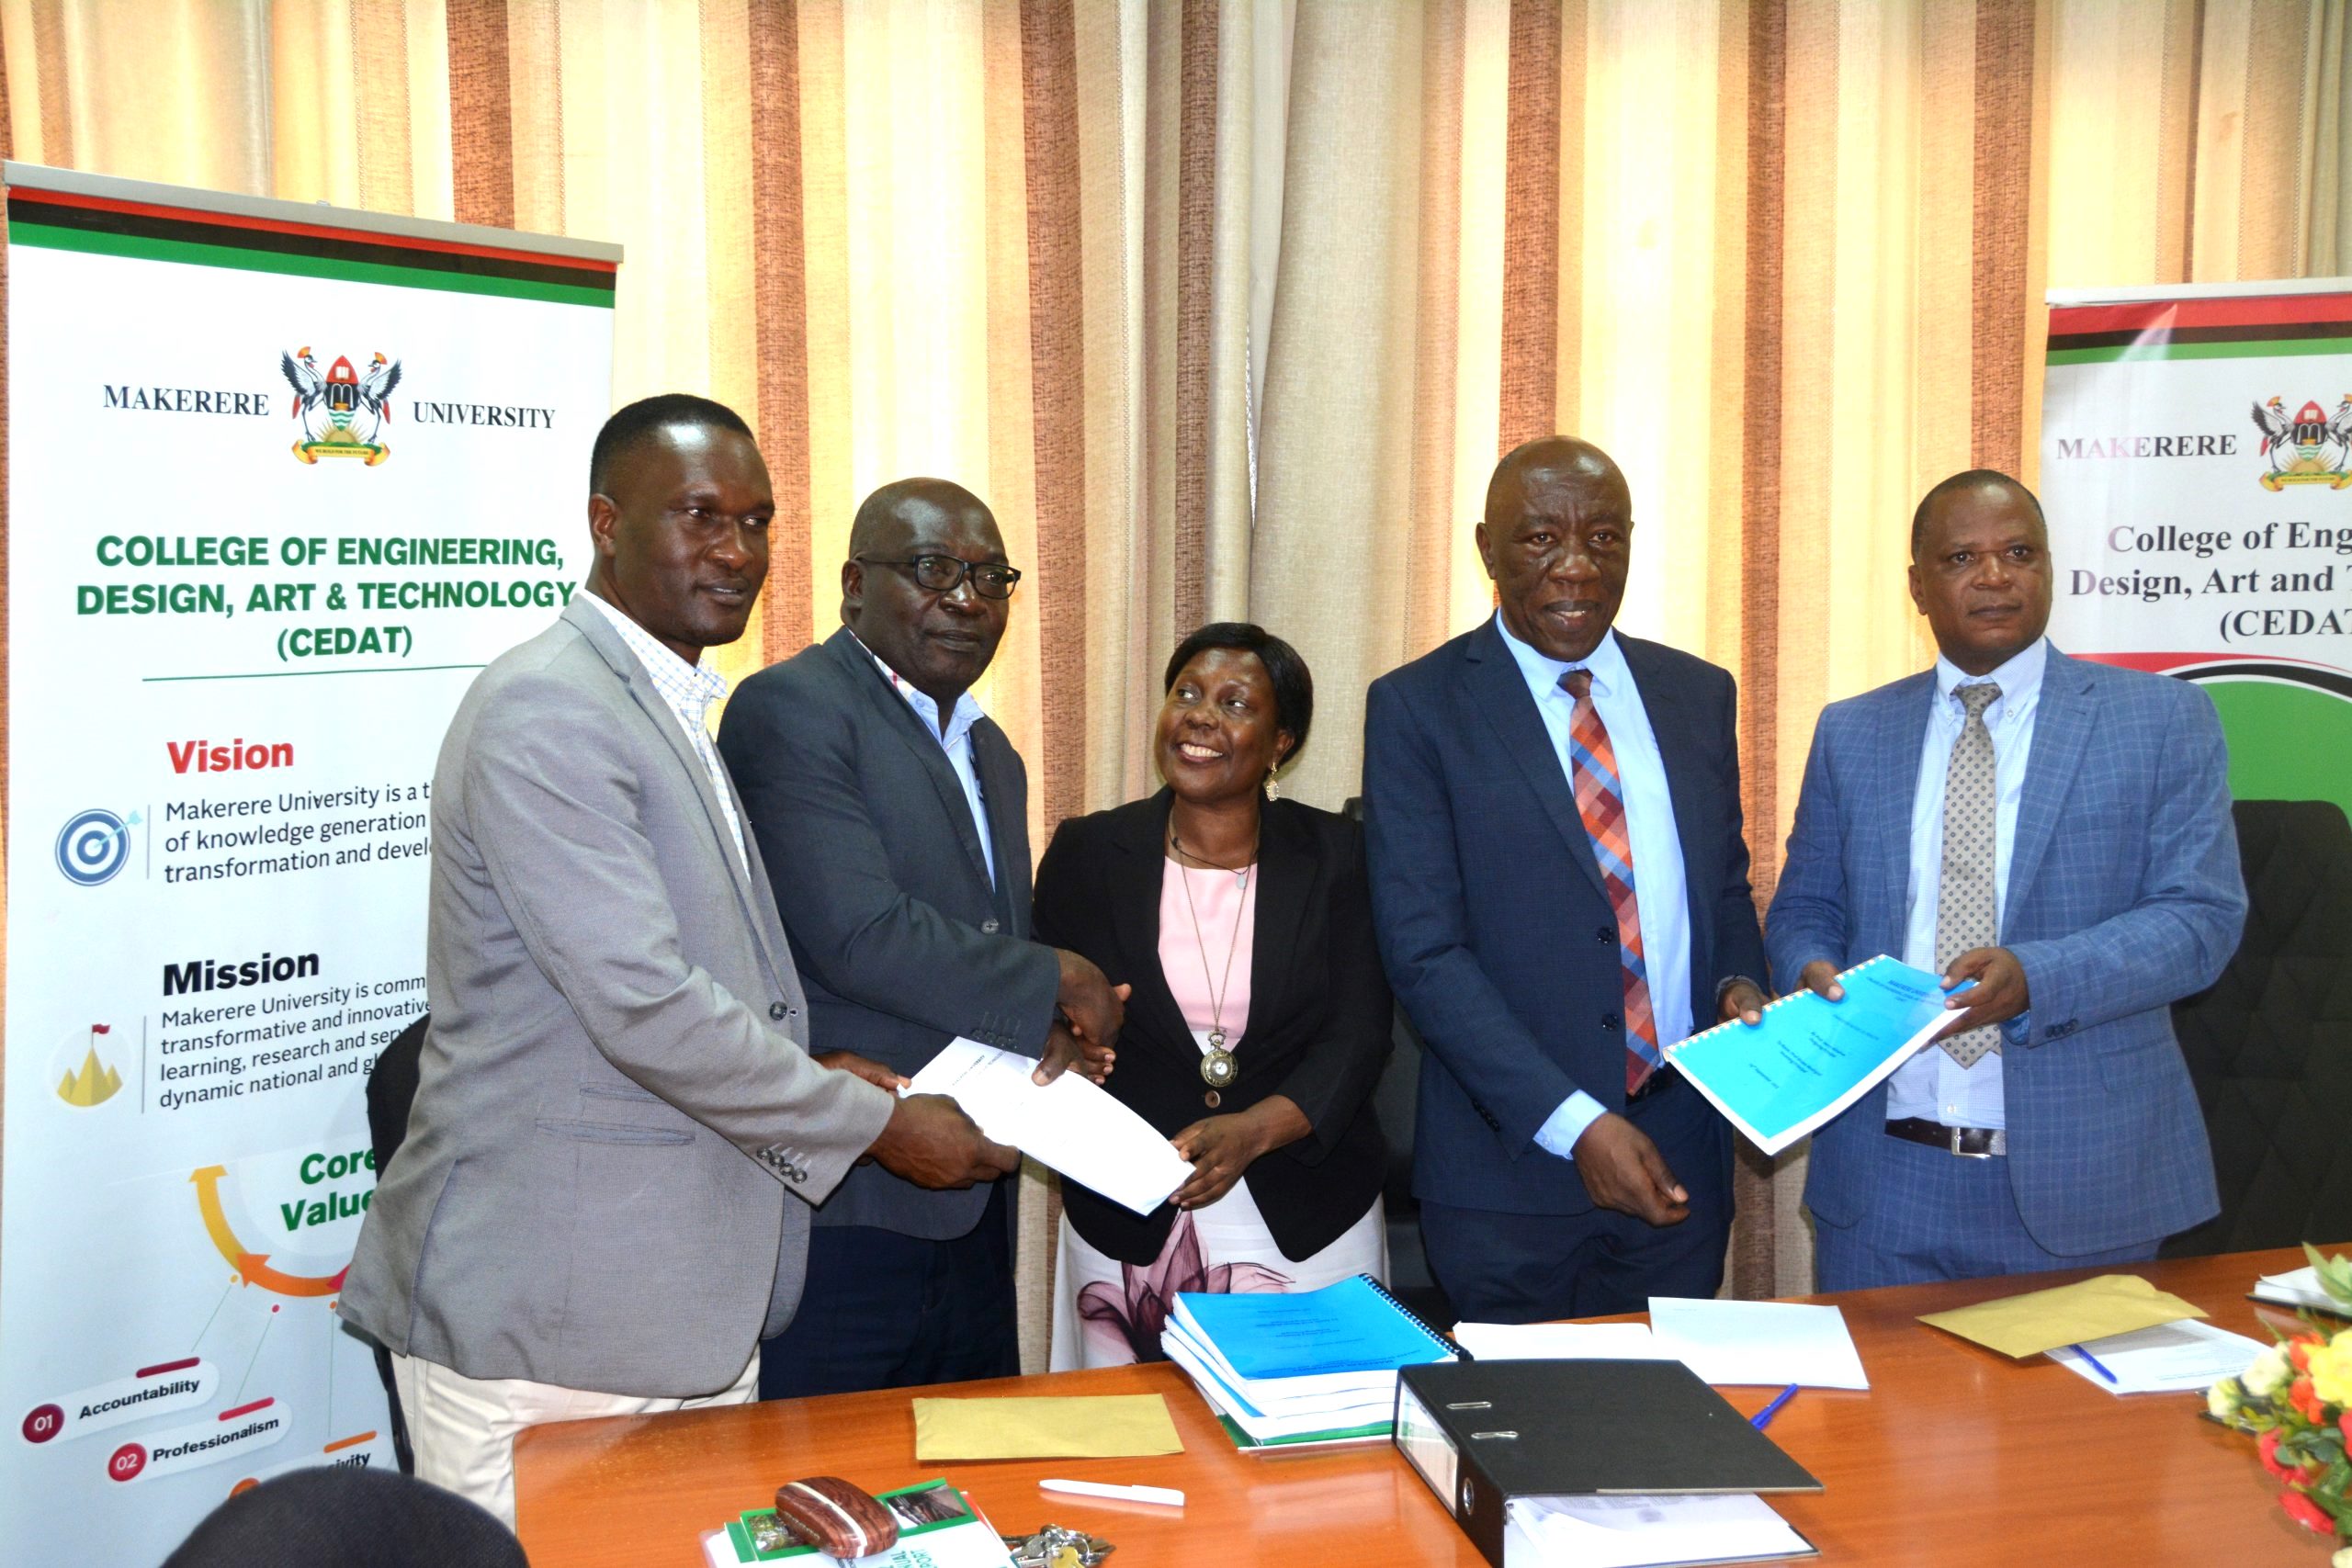 Prof. Henry Alinaitwe (2nd Right) hands over to incoming Principal, Assoc. Prof. Moses Musinguzi (Right) while Assoc. Prof. Venny Nakazibwe (Centre) hands over to incoming Deputy Principal, Assoc. Prof. Kizito Maria Kasule (2nd Left) as the Directorate of Internal Audit's Mr. Aggrey Luwuliza (Left) witnesses on 29th September 2023. The Boardroom, College of Engineering, Design, Art and Technology (CEDAT), Makerere University, Kampala Uganda. East Africa.